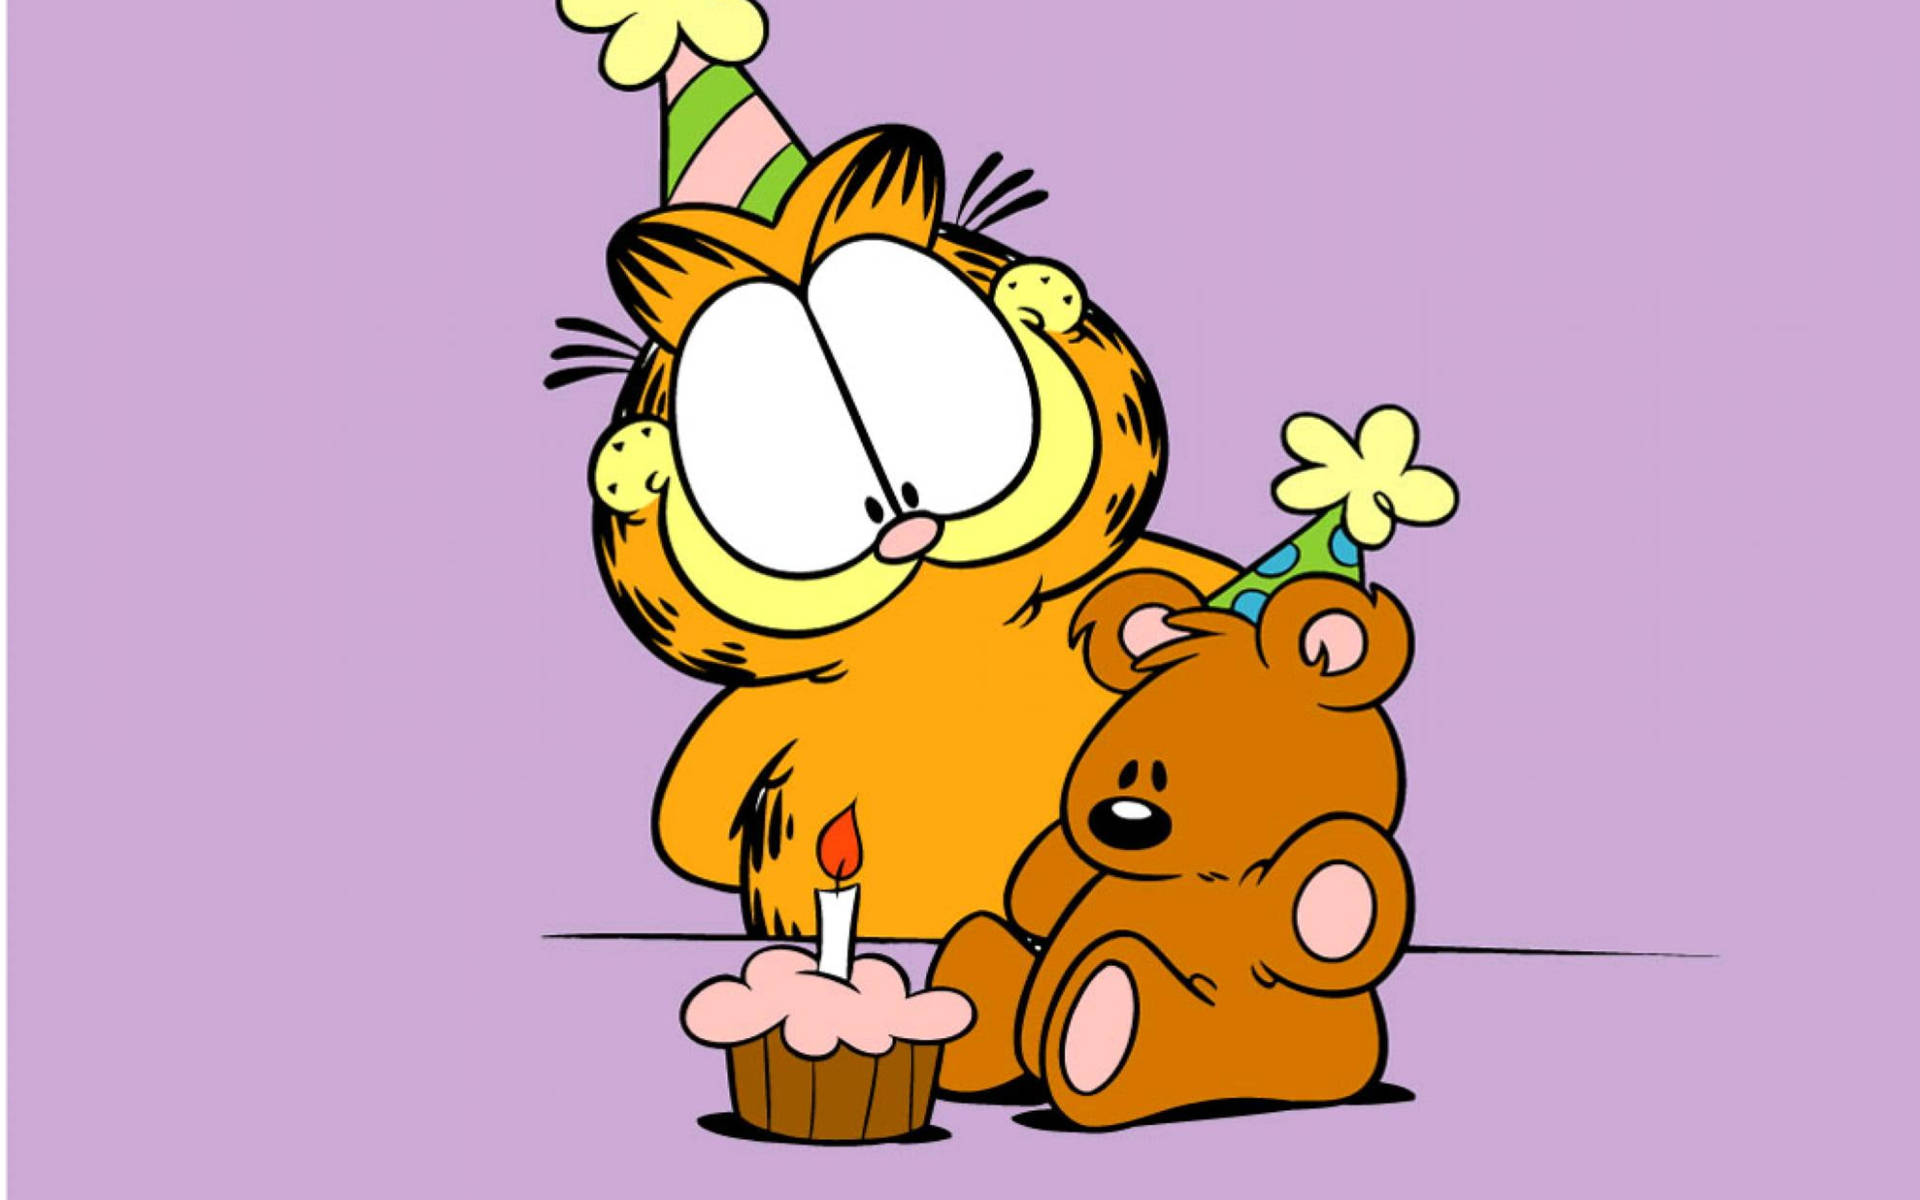 Garfield At Pooky's Birthday Background